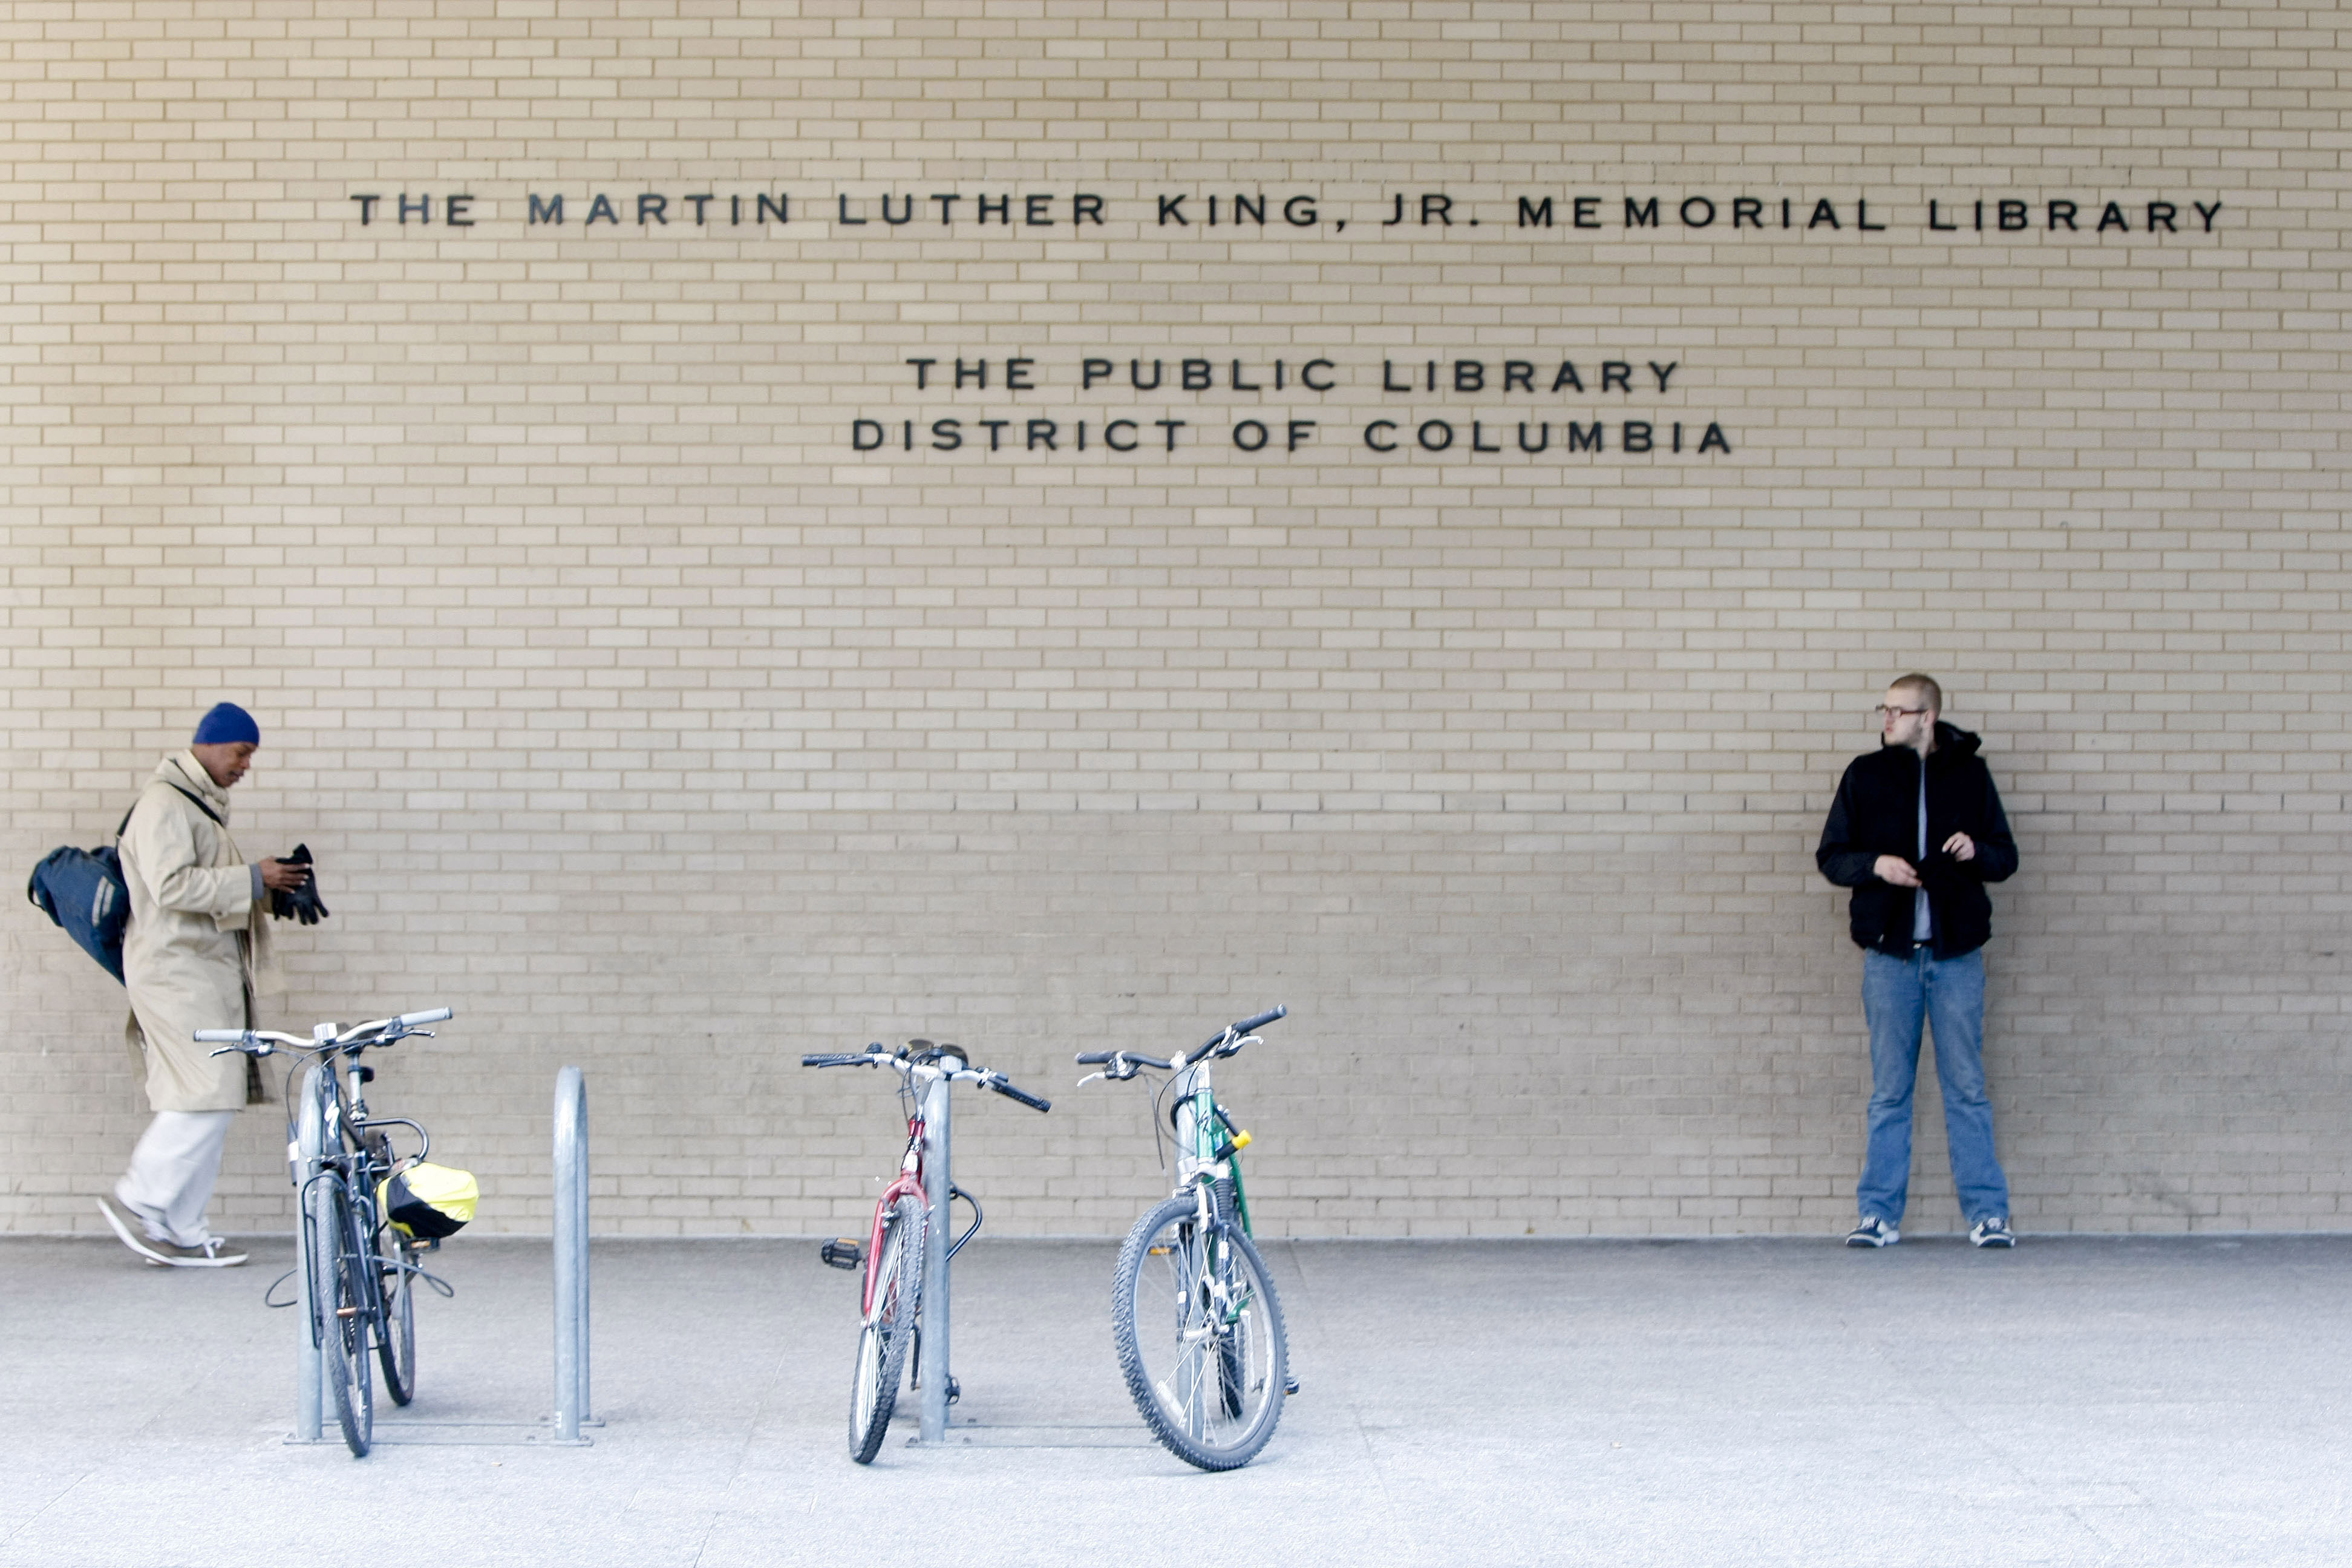 The brick facade of the Martin Luther King Jr. Library up close, with two men standing out front.